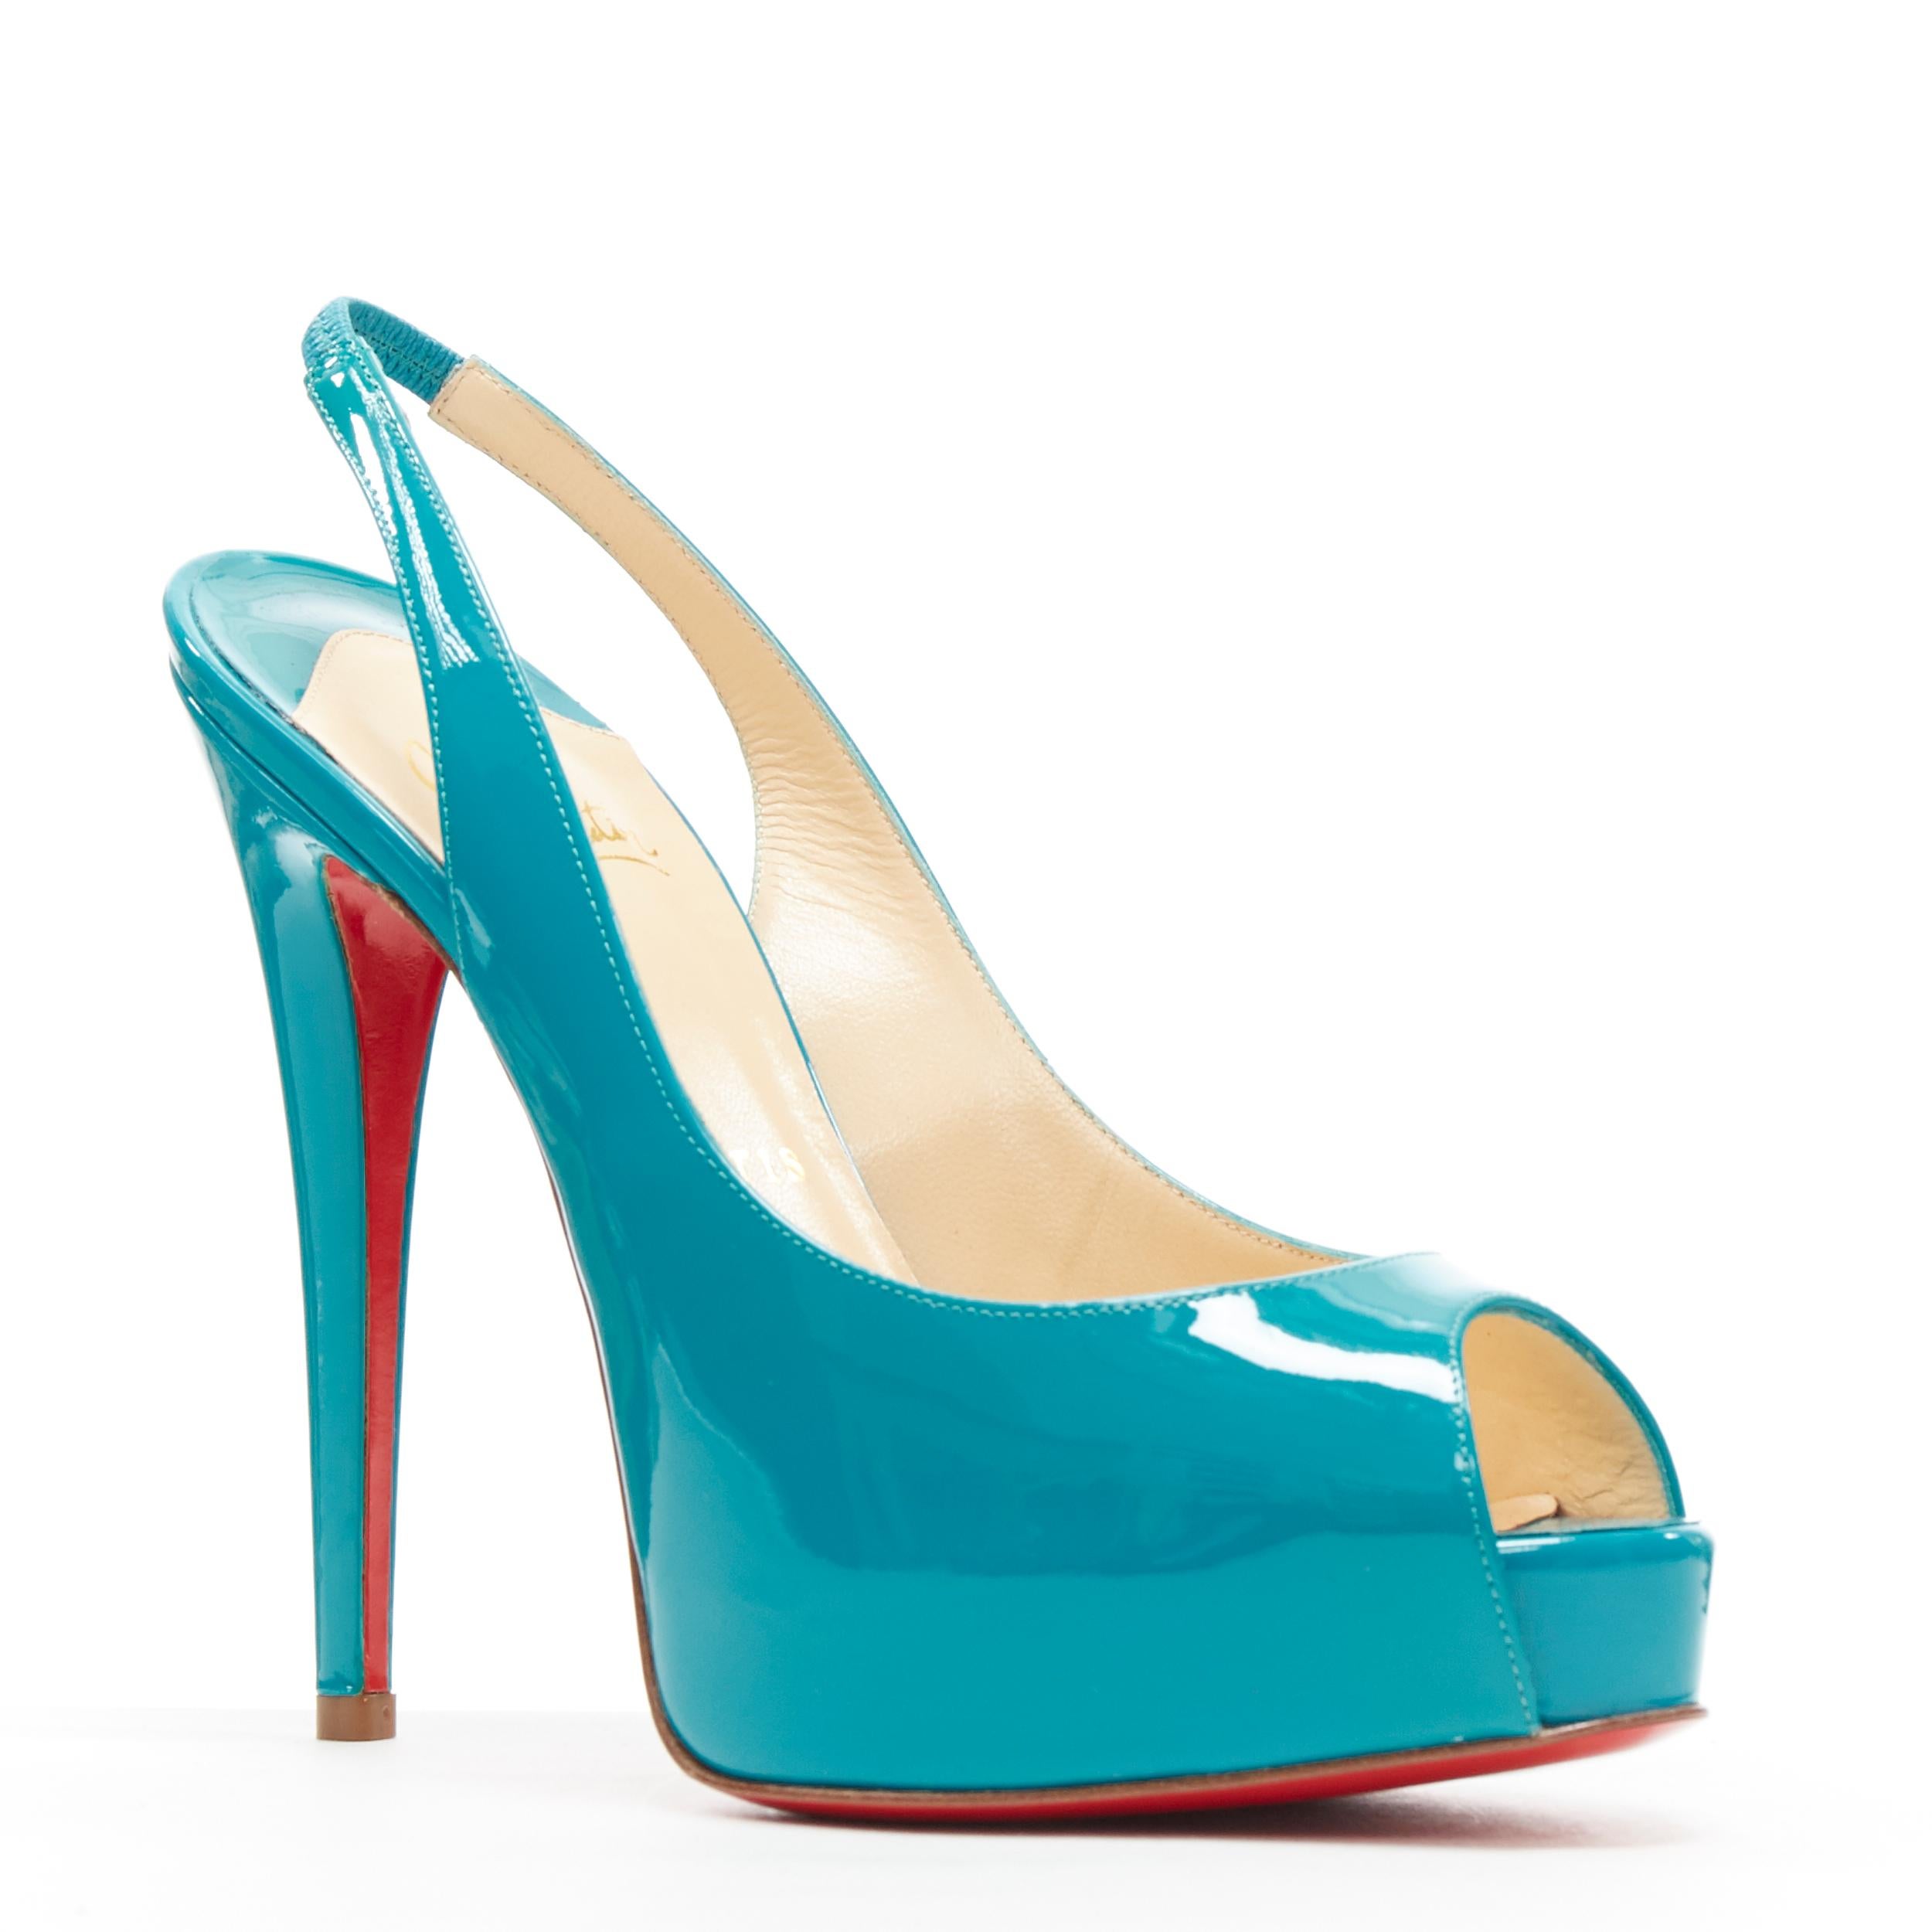 new CHRISTIAN LOUBOUTIN Vendome Sling 120 teal  patent peep toe platform EU37.5
Brand: Christian Louboutin
Designer: Christian Louboutin
Model Name / Style: Vendome Sling 120
Material: Patent leather
Color: Blue
Pattern: Solid
Closure: Sling